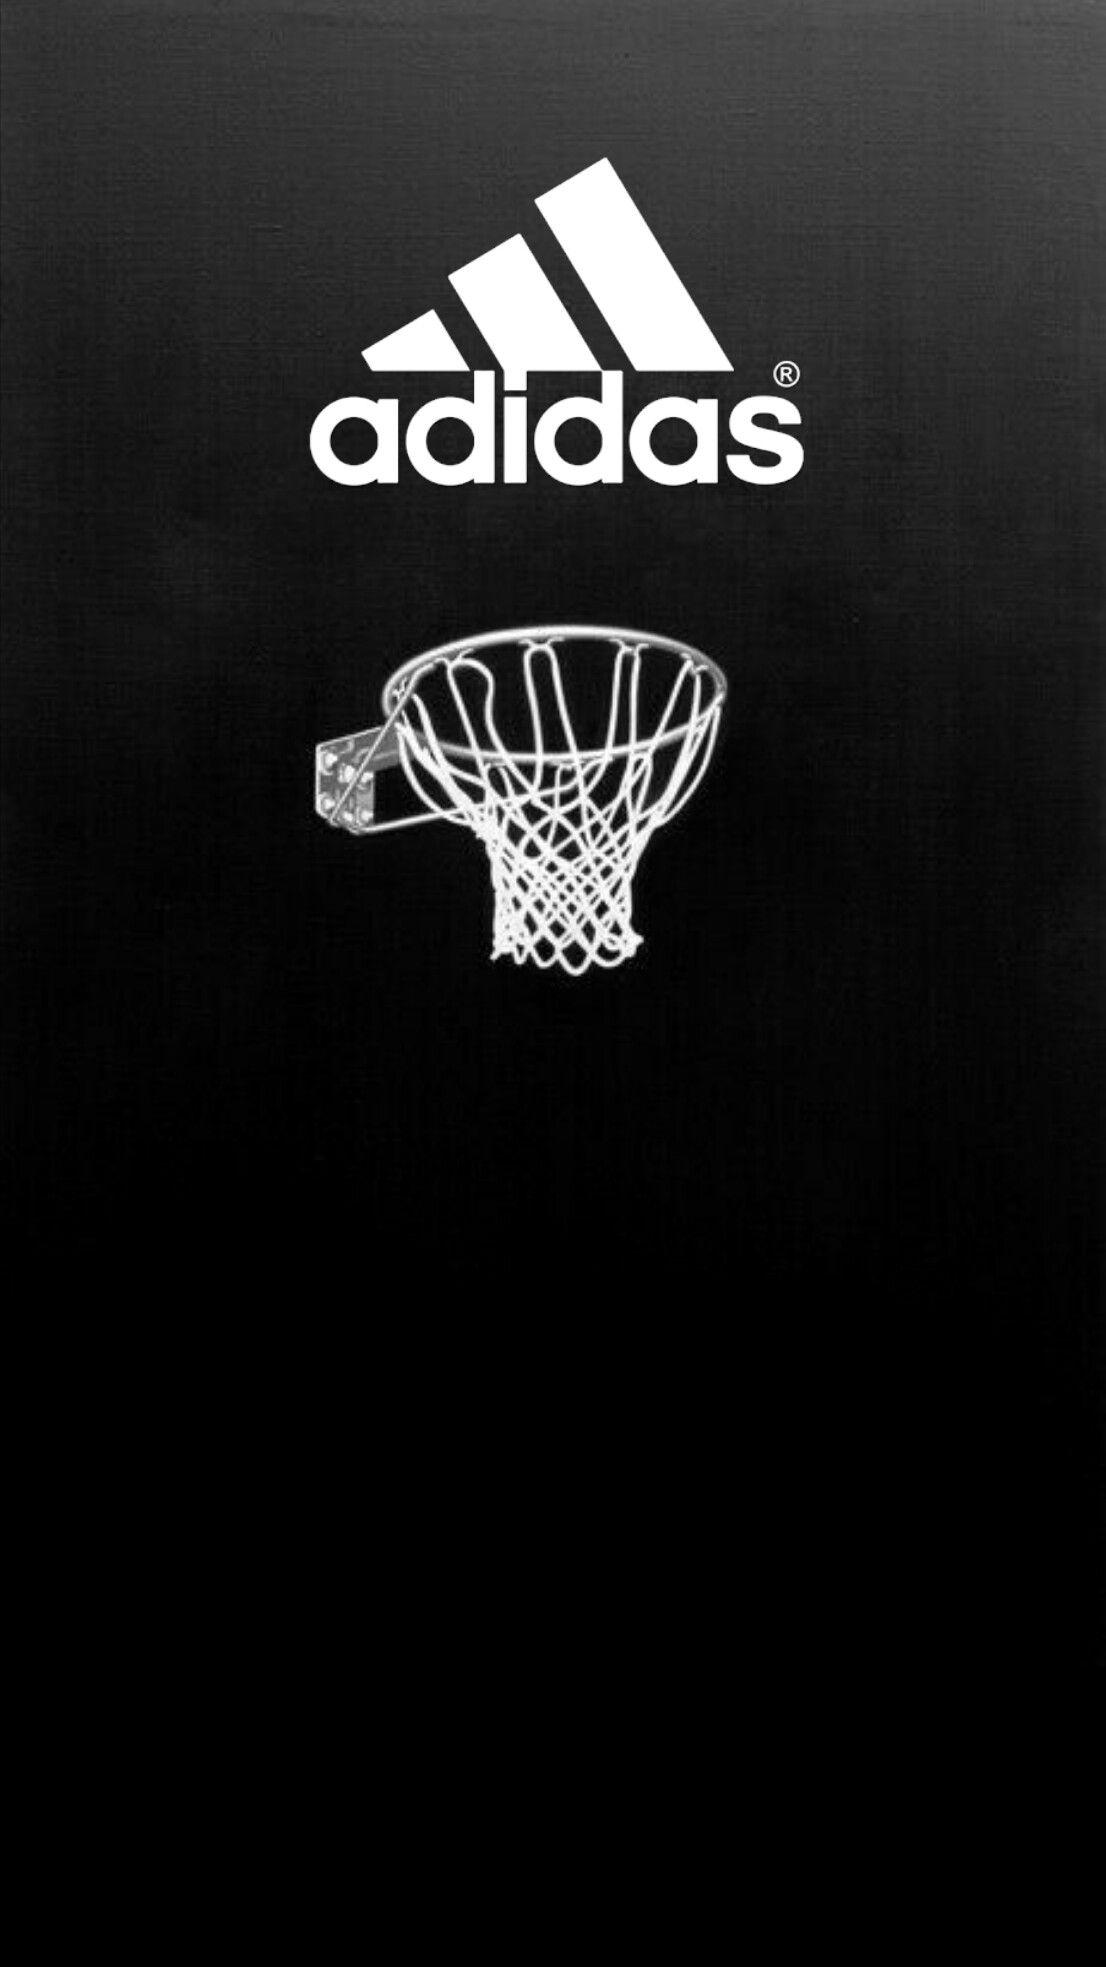 adidas #basketball #wallpaper #android #iphone #ios in 2019